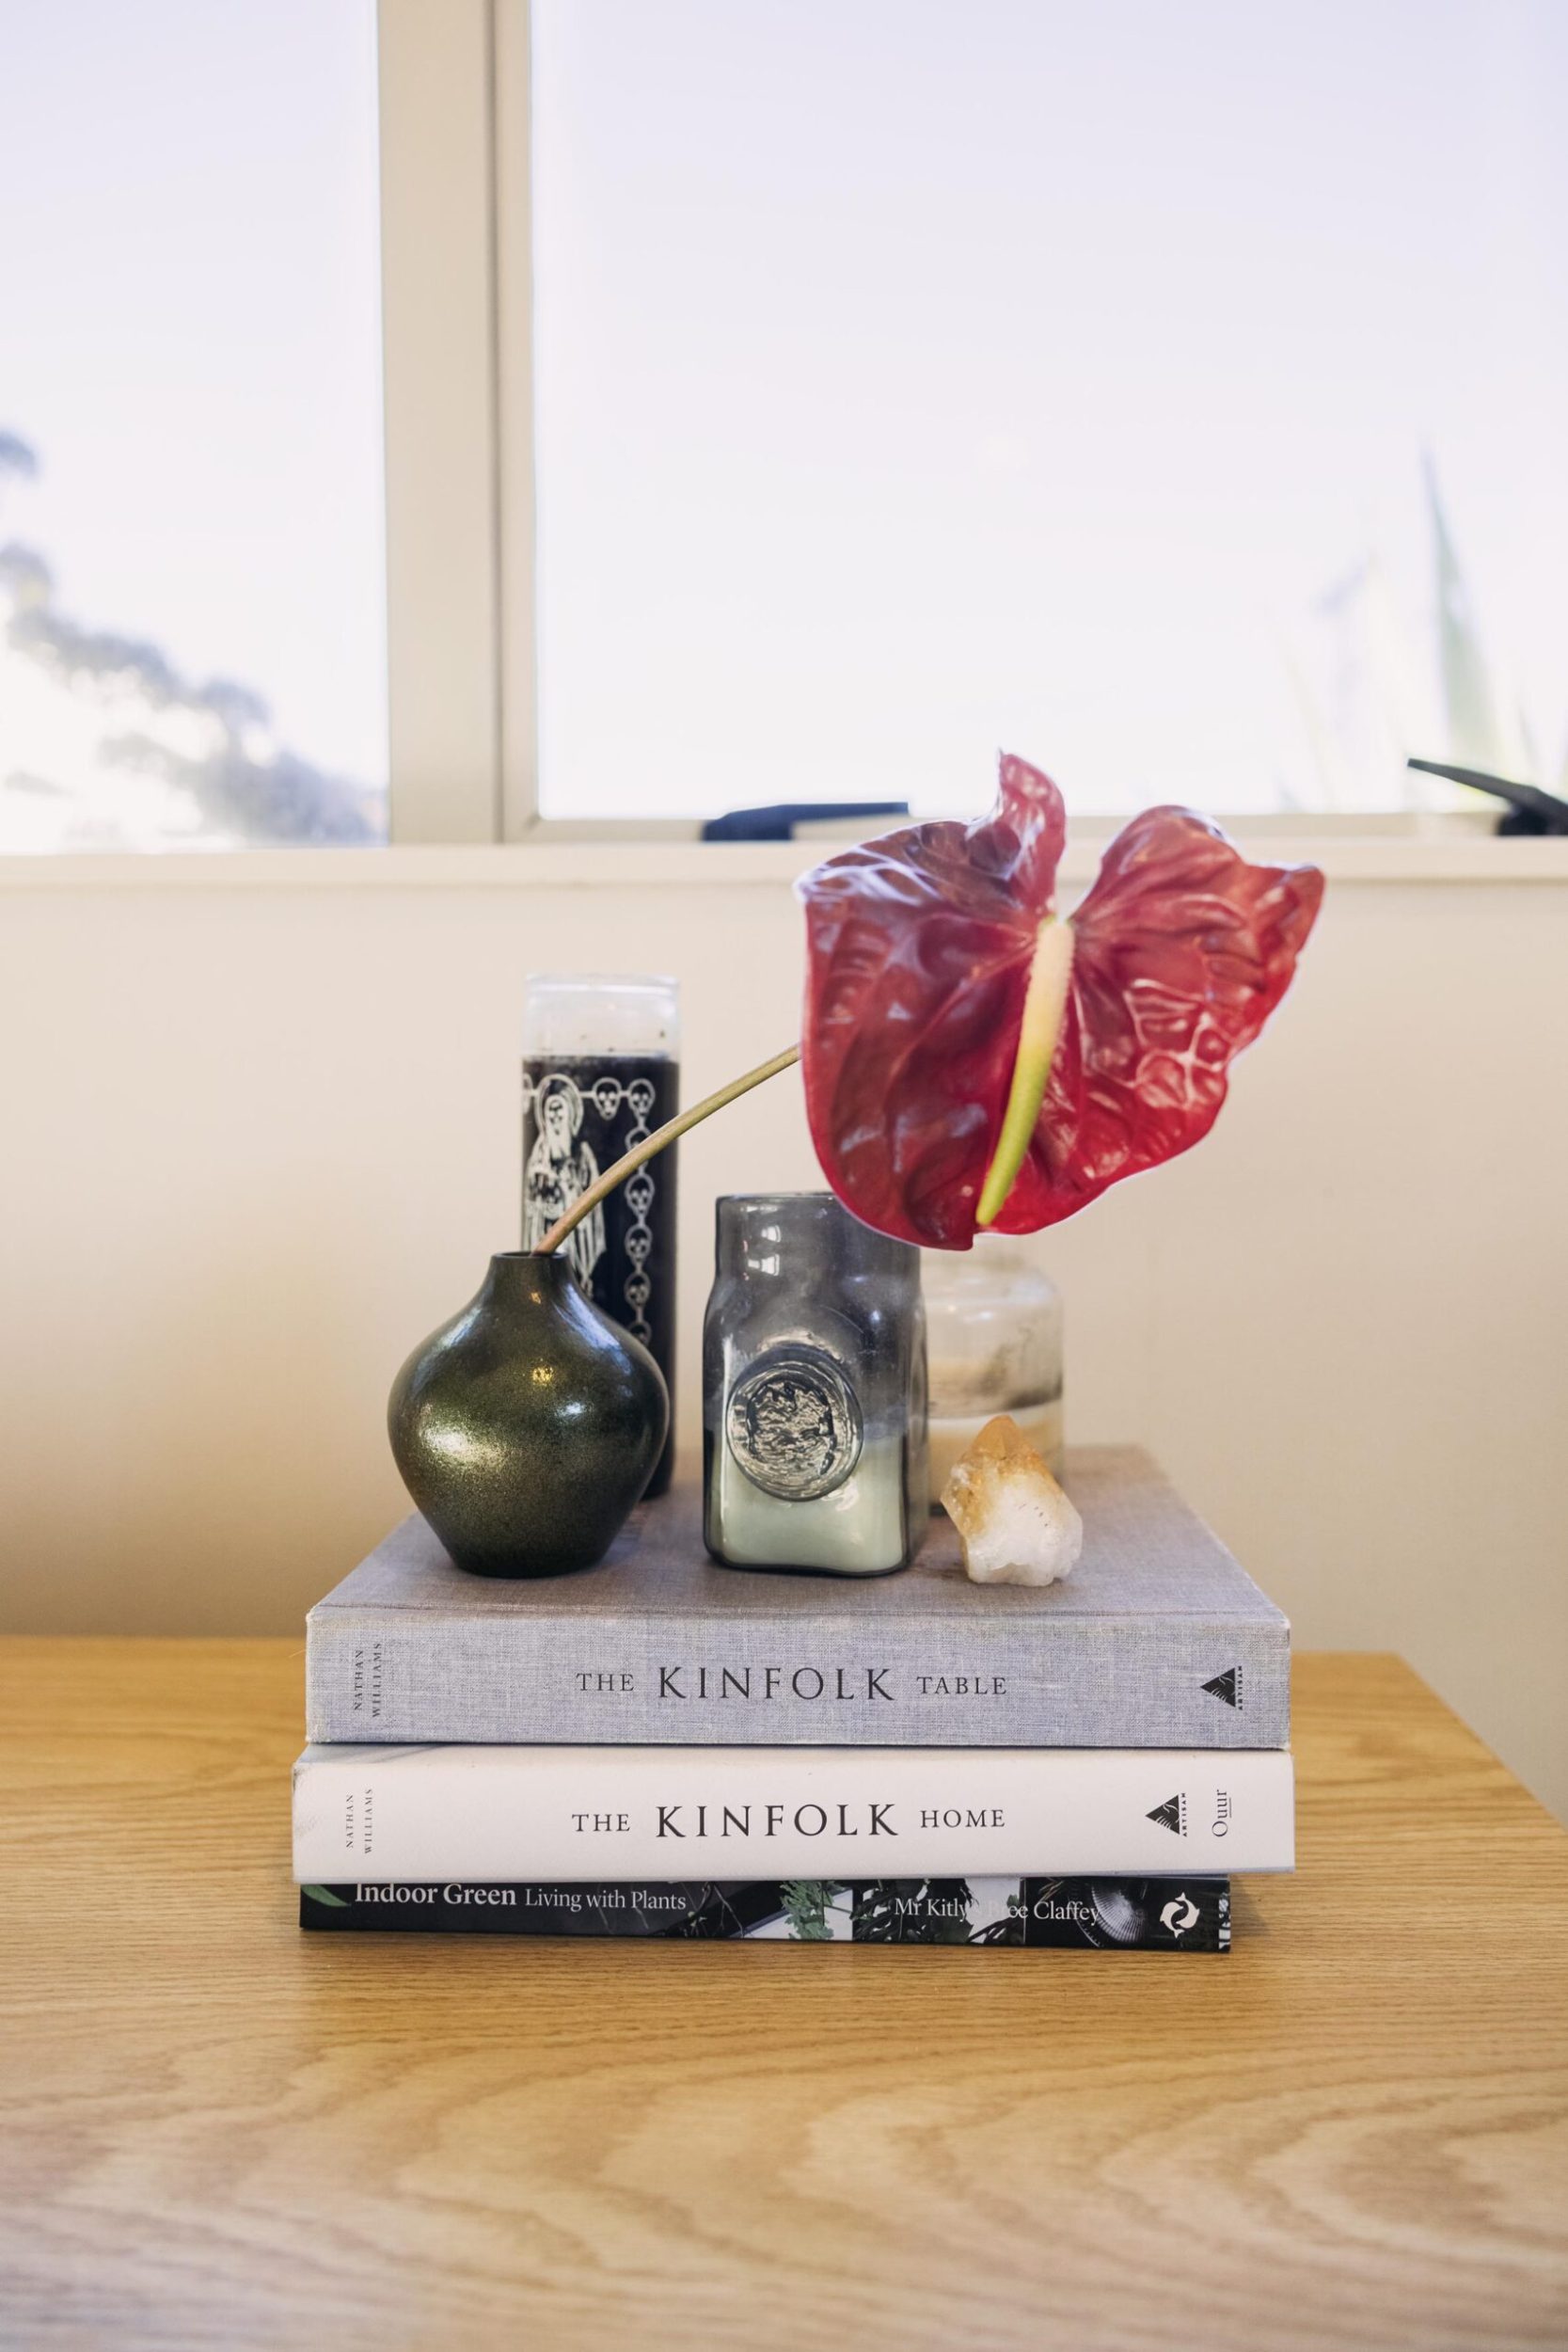 A wood bedside table with a stack of The Kinfolk books, candles and decorative red flower